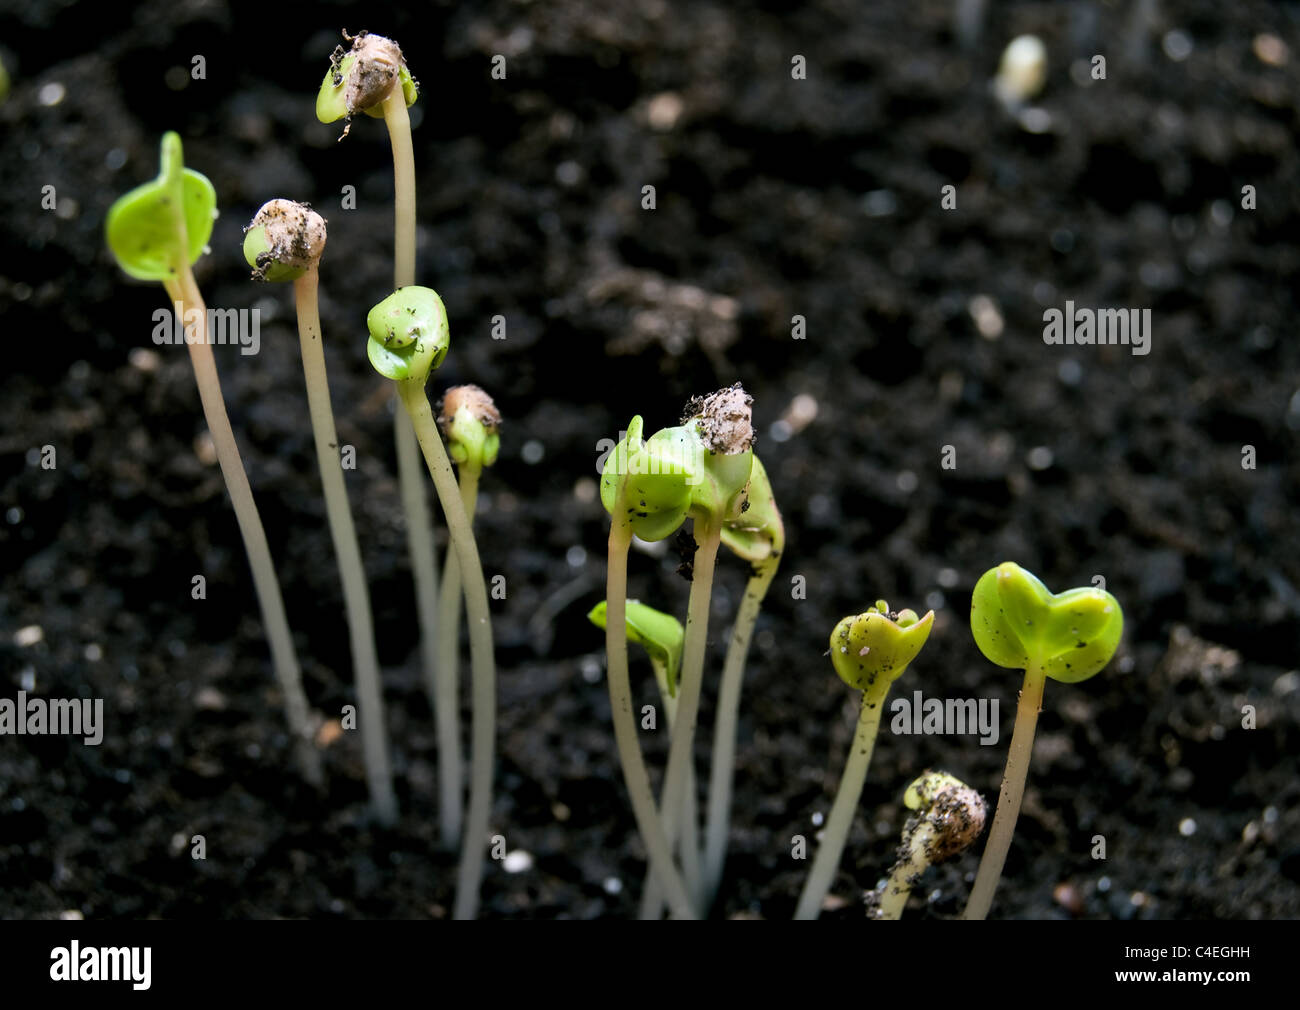 small green plants close up Stock Photo